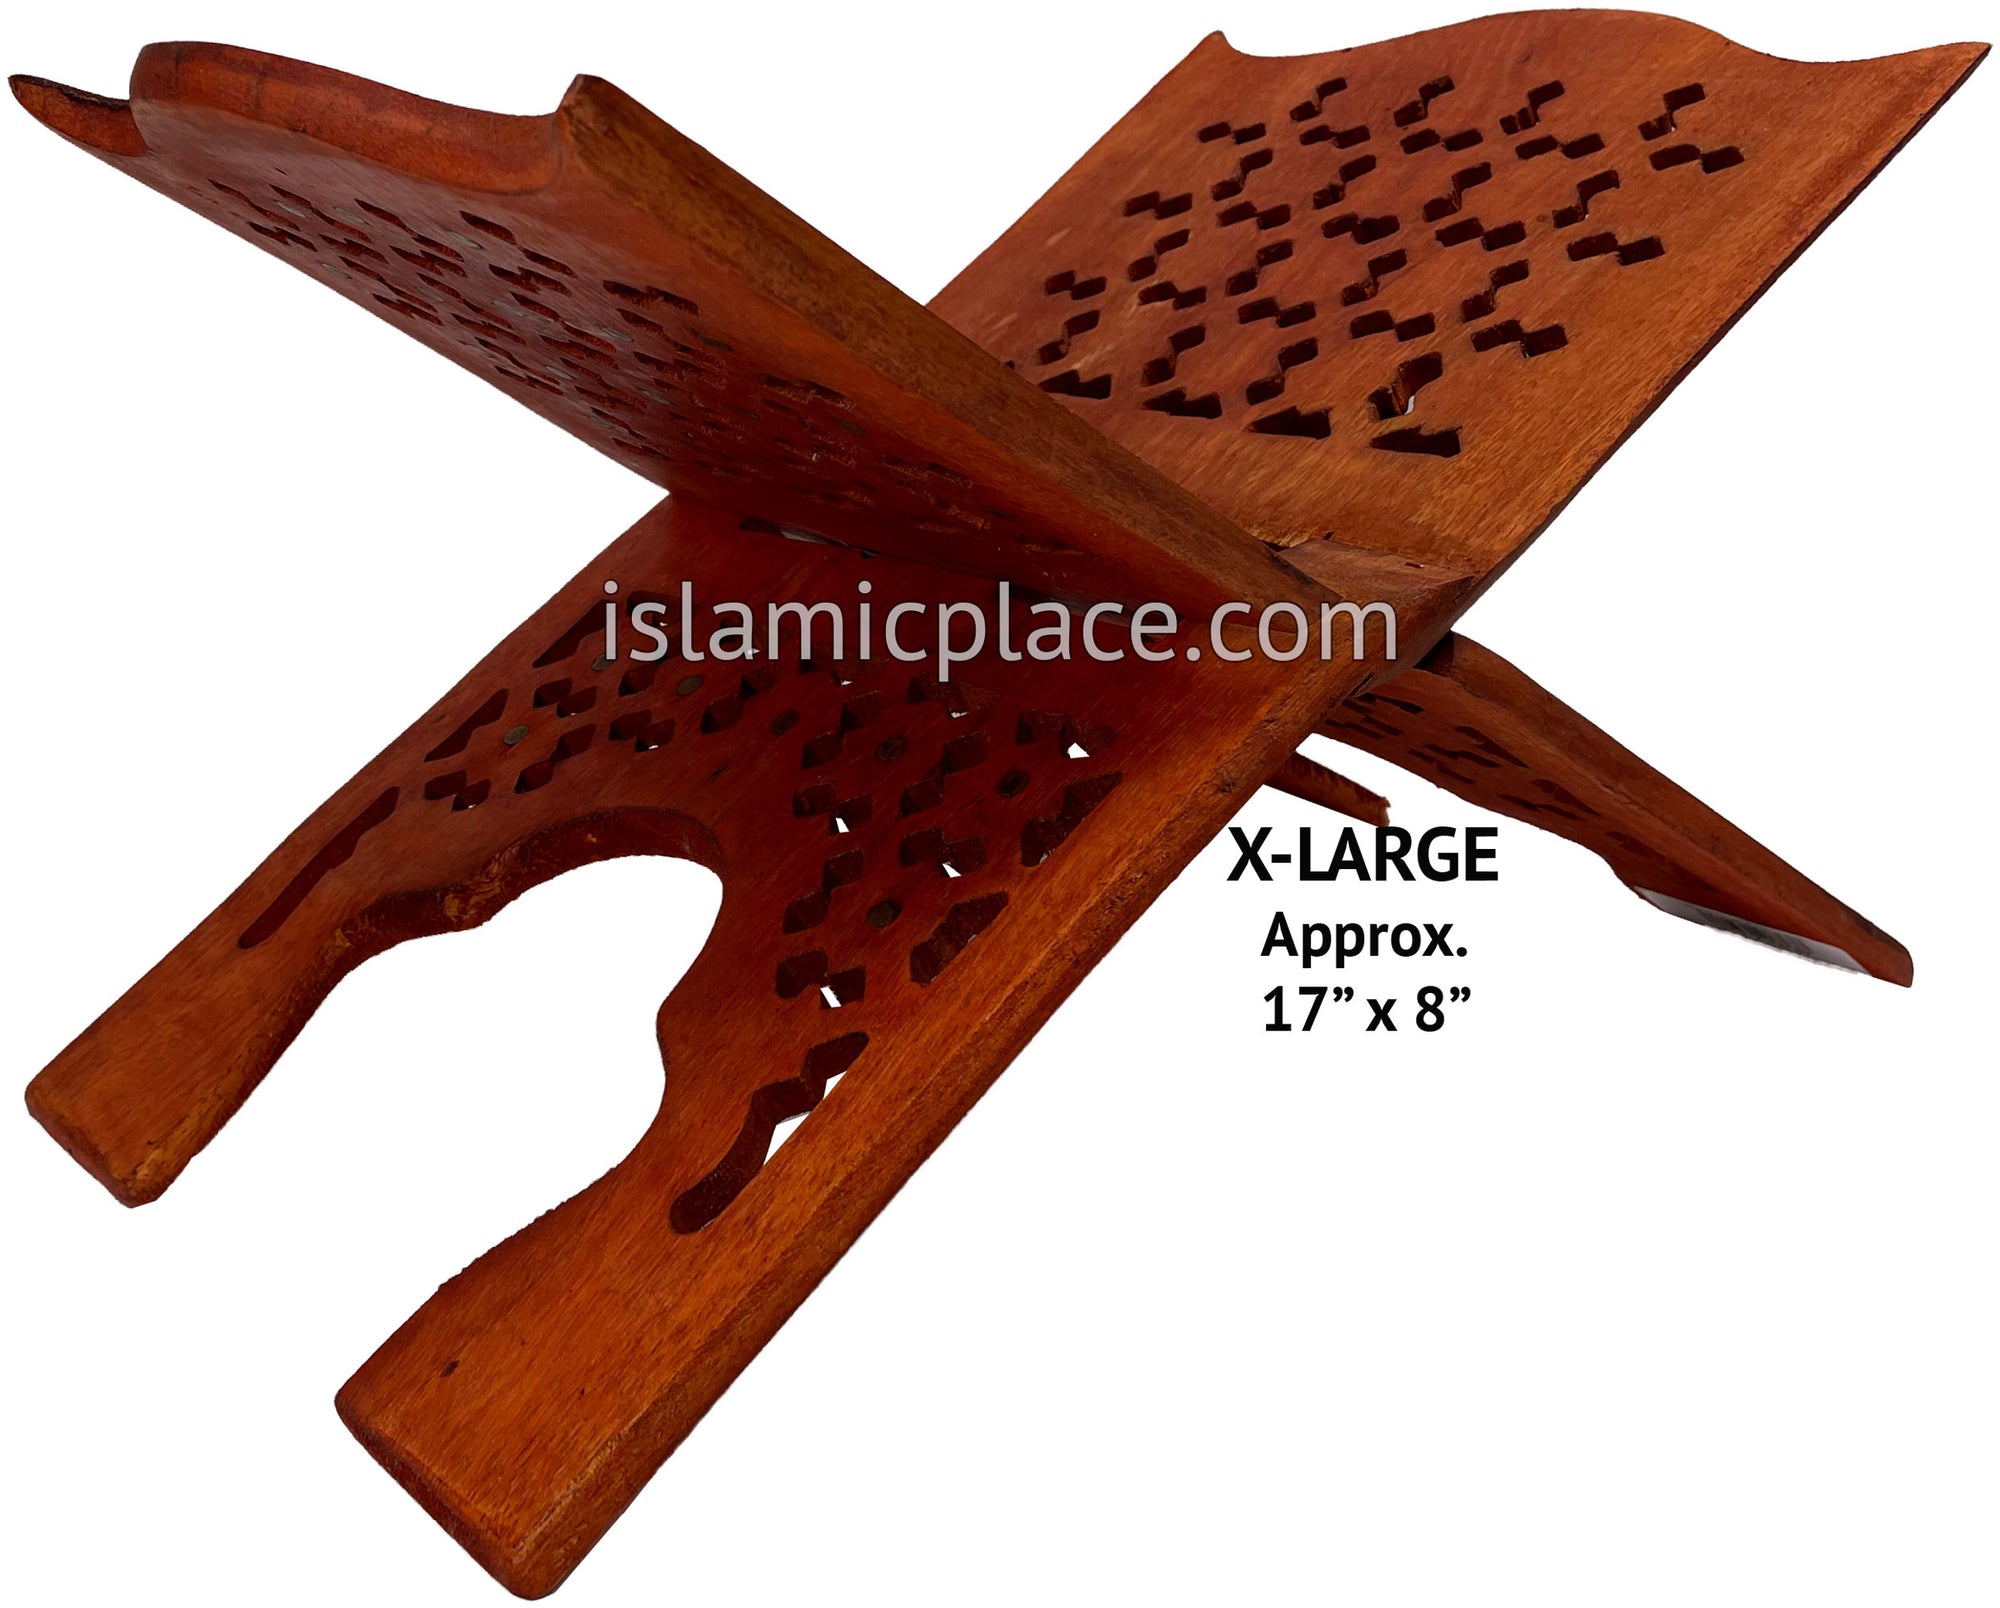 Mujeeb Design Wooden Carved Quran book holder - X-Large Rehal